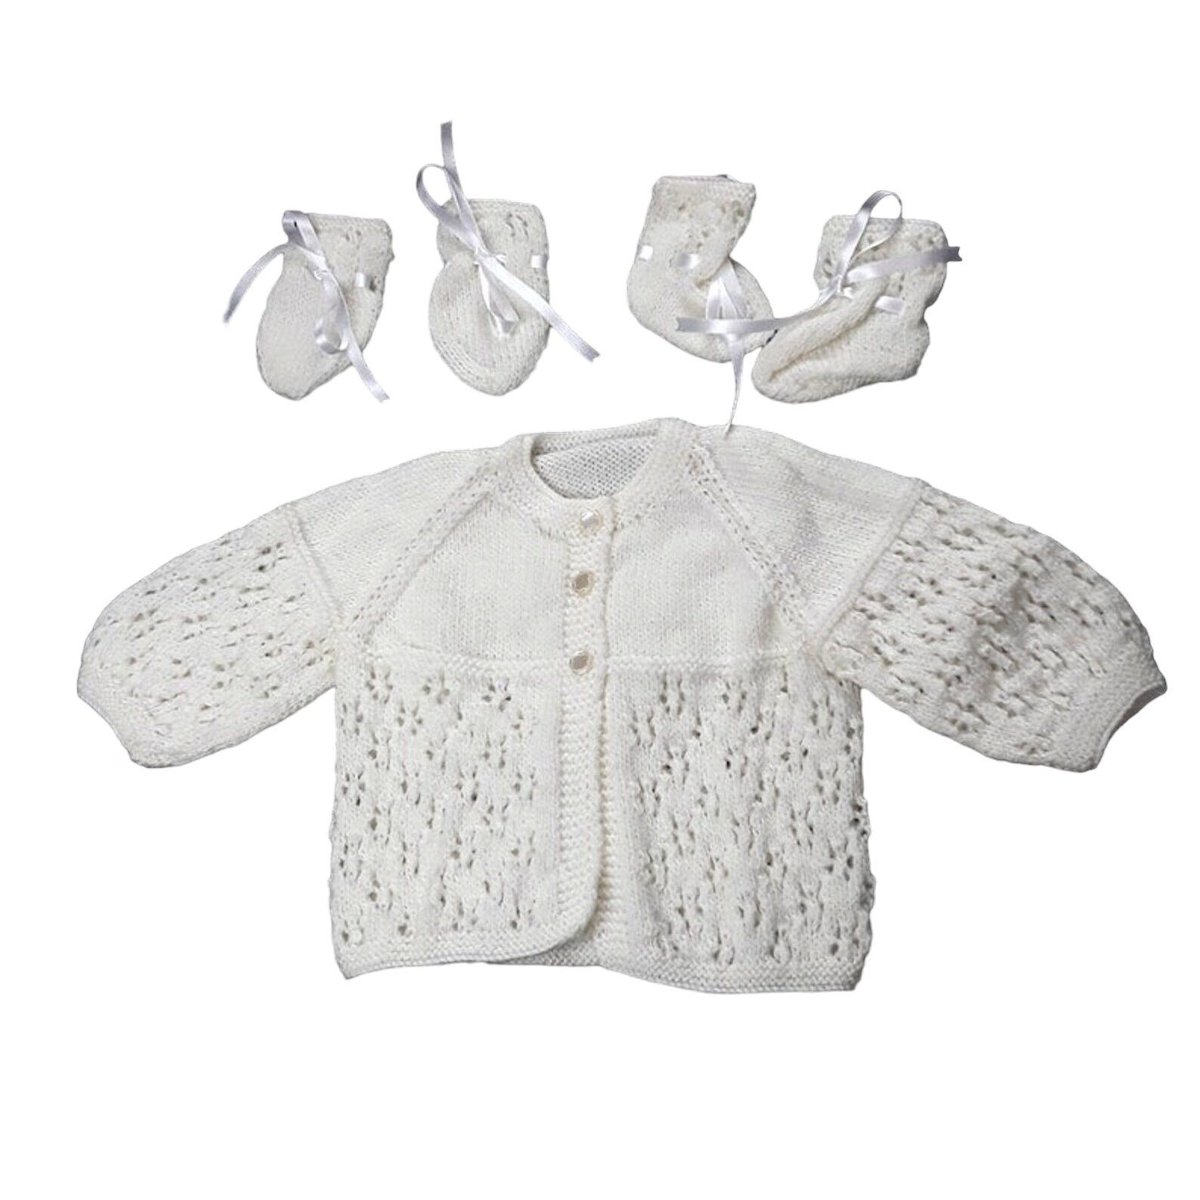 Dress your little one in this cute, hand-knitted baby matinee set! It's perfect for the warmer months, fitting 3-6 months old. Get yours at knittingtopia.etsy.com/listing/168055… #knittedbabyclothes #handmade #etsy #craftbizparty #MHHSBD #knittingtopia #babyessentials